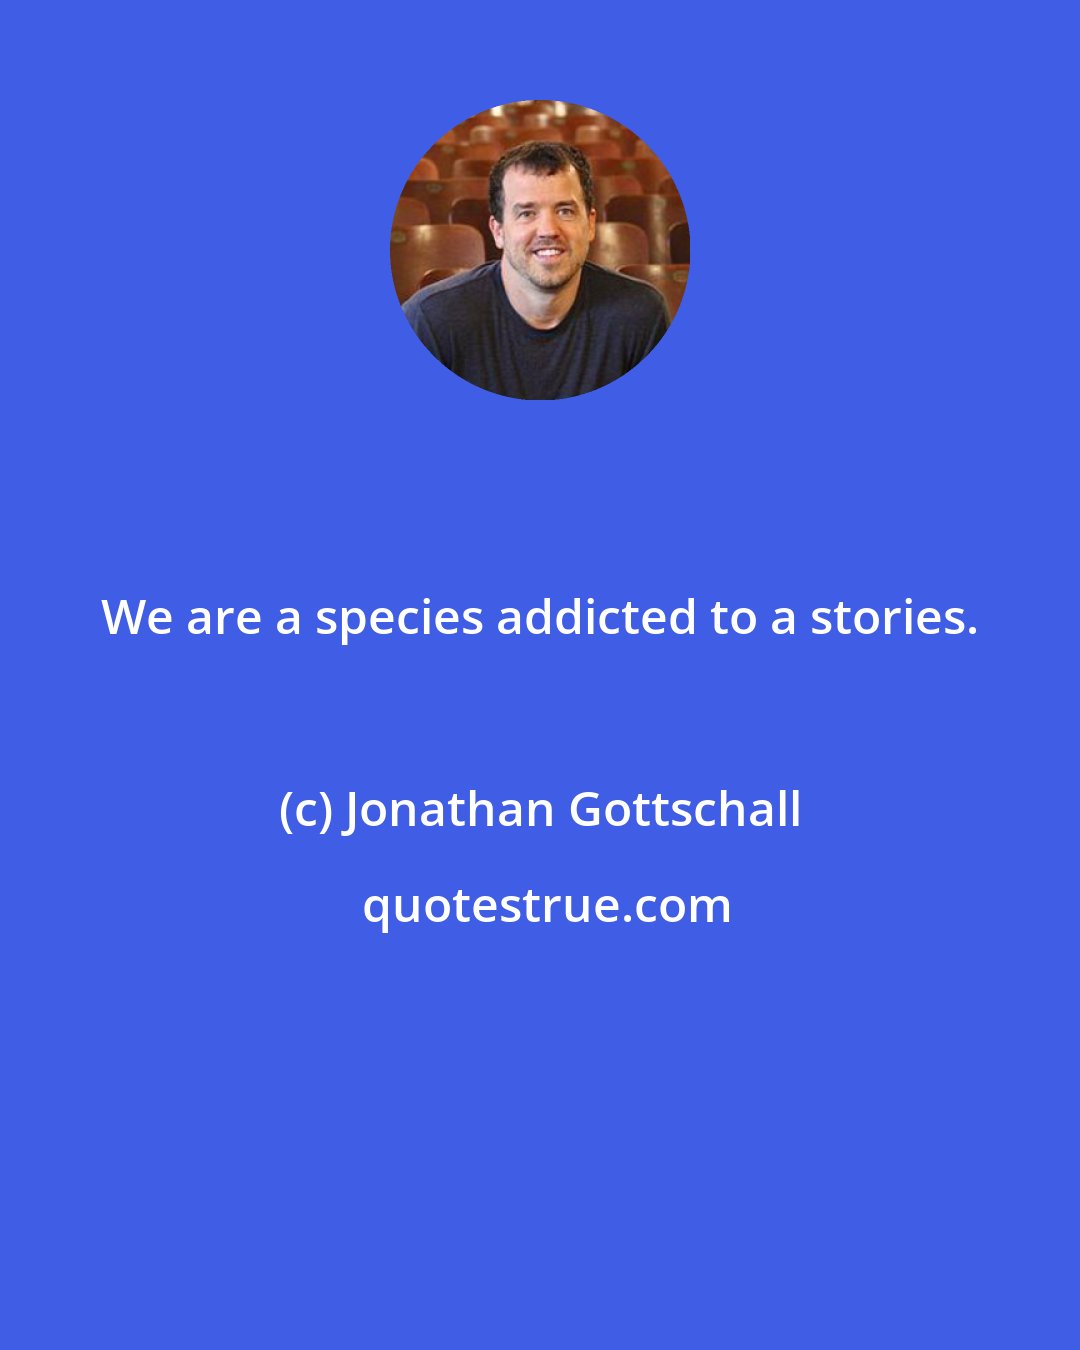 Jonathan Gottschall: We are a species addicted to a stories.